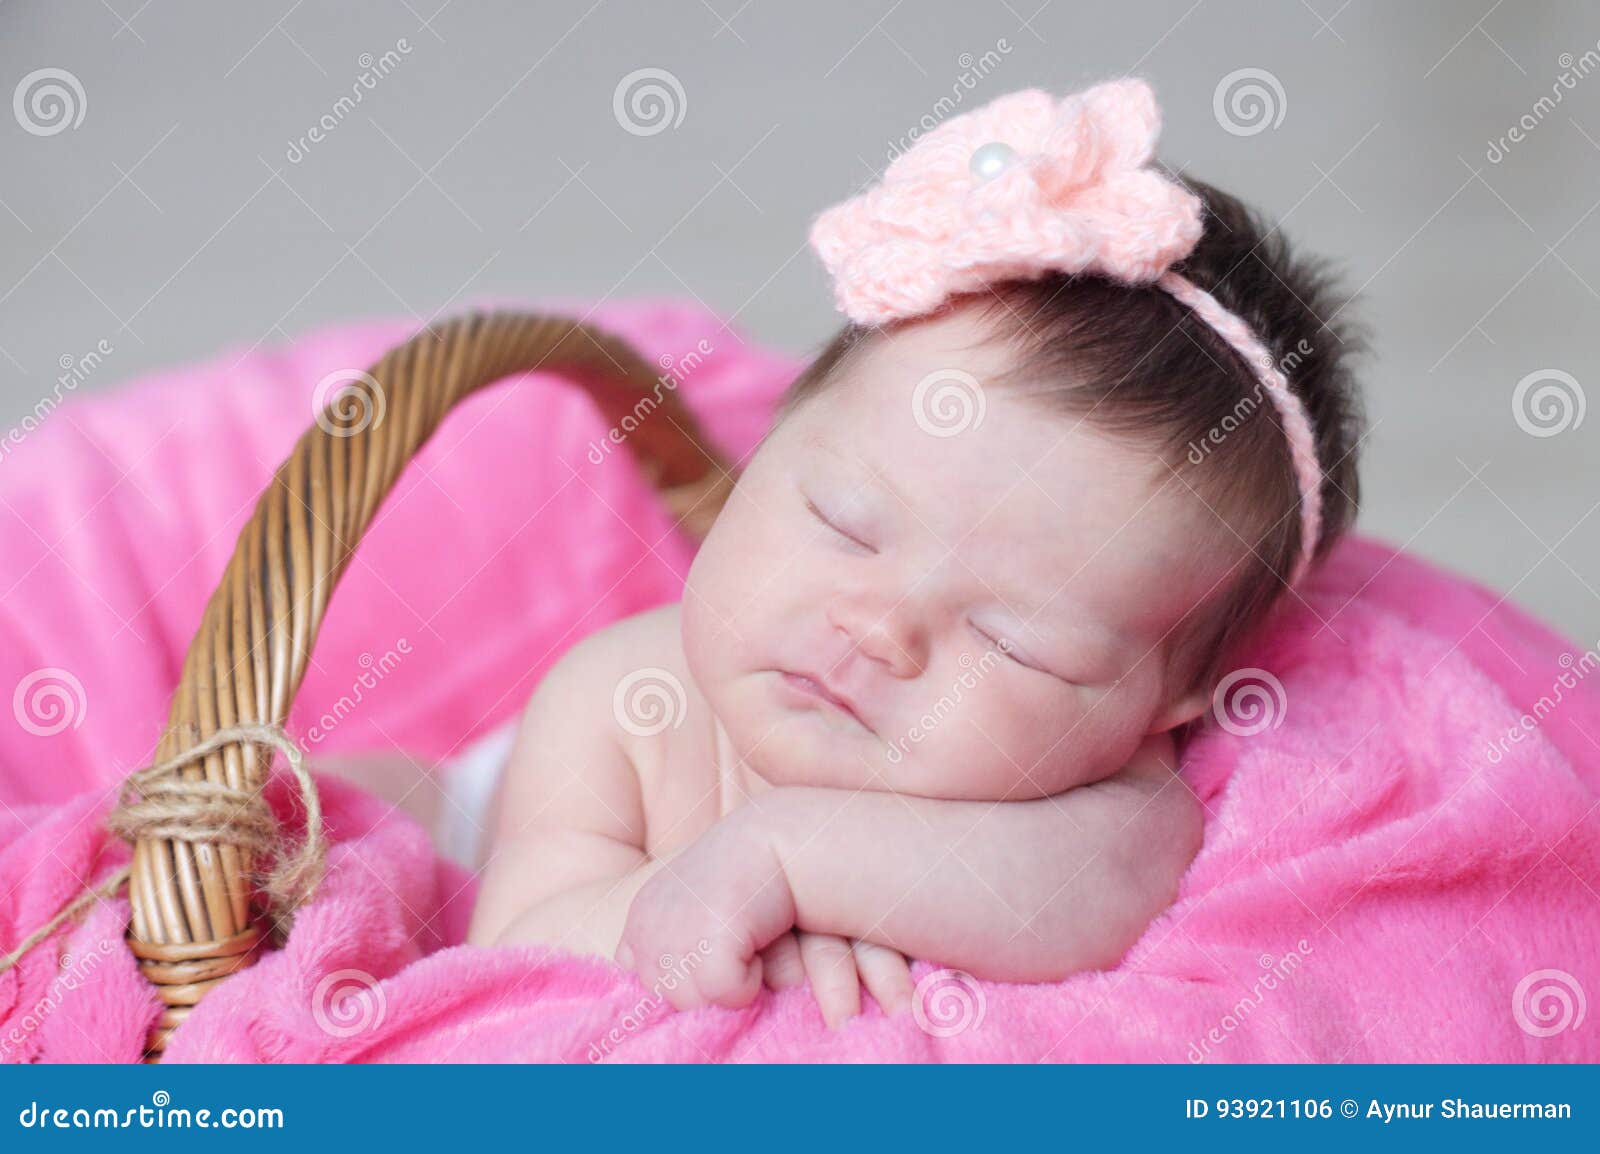 Infant Sleeping in Basket with Knitted Flower on Head, Baby Girl ...